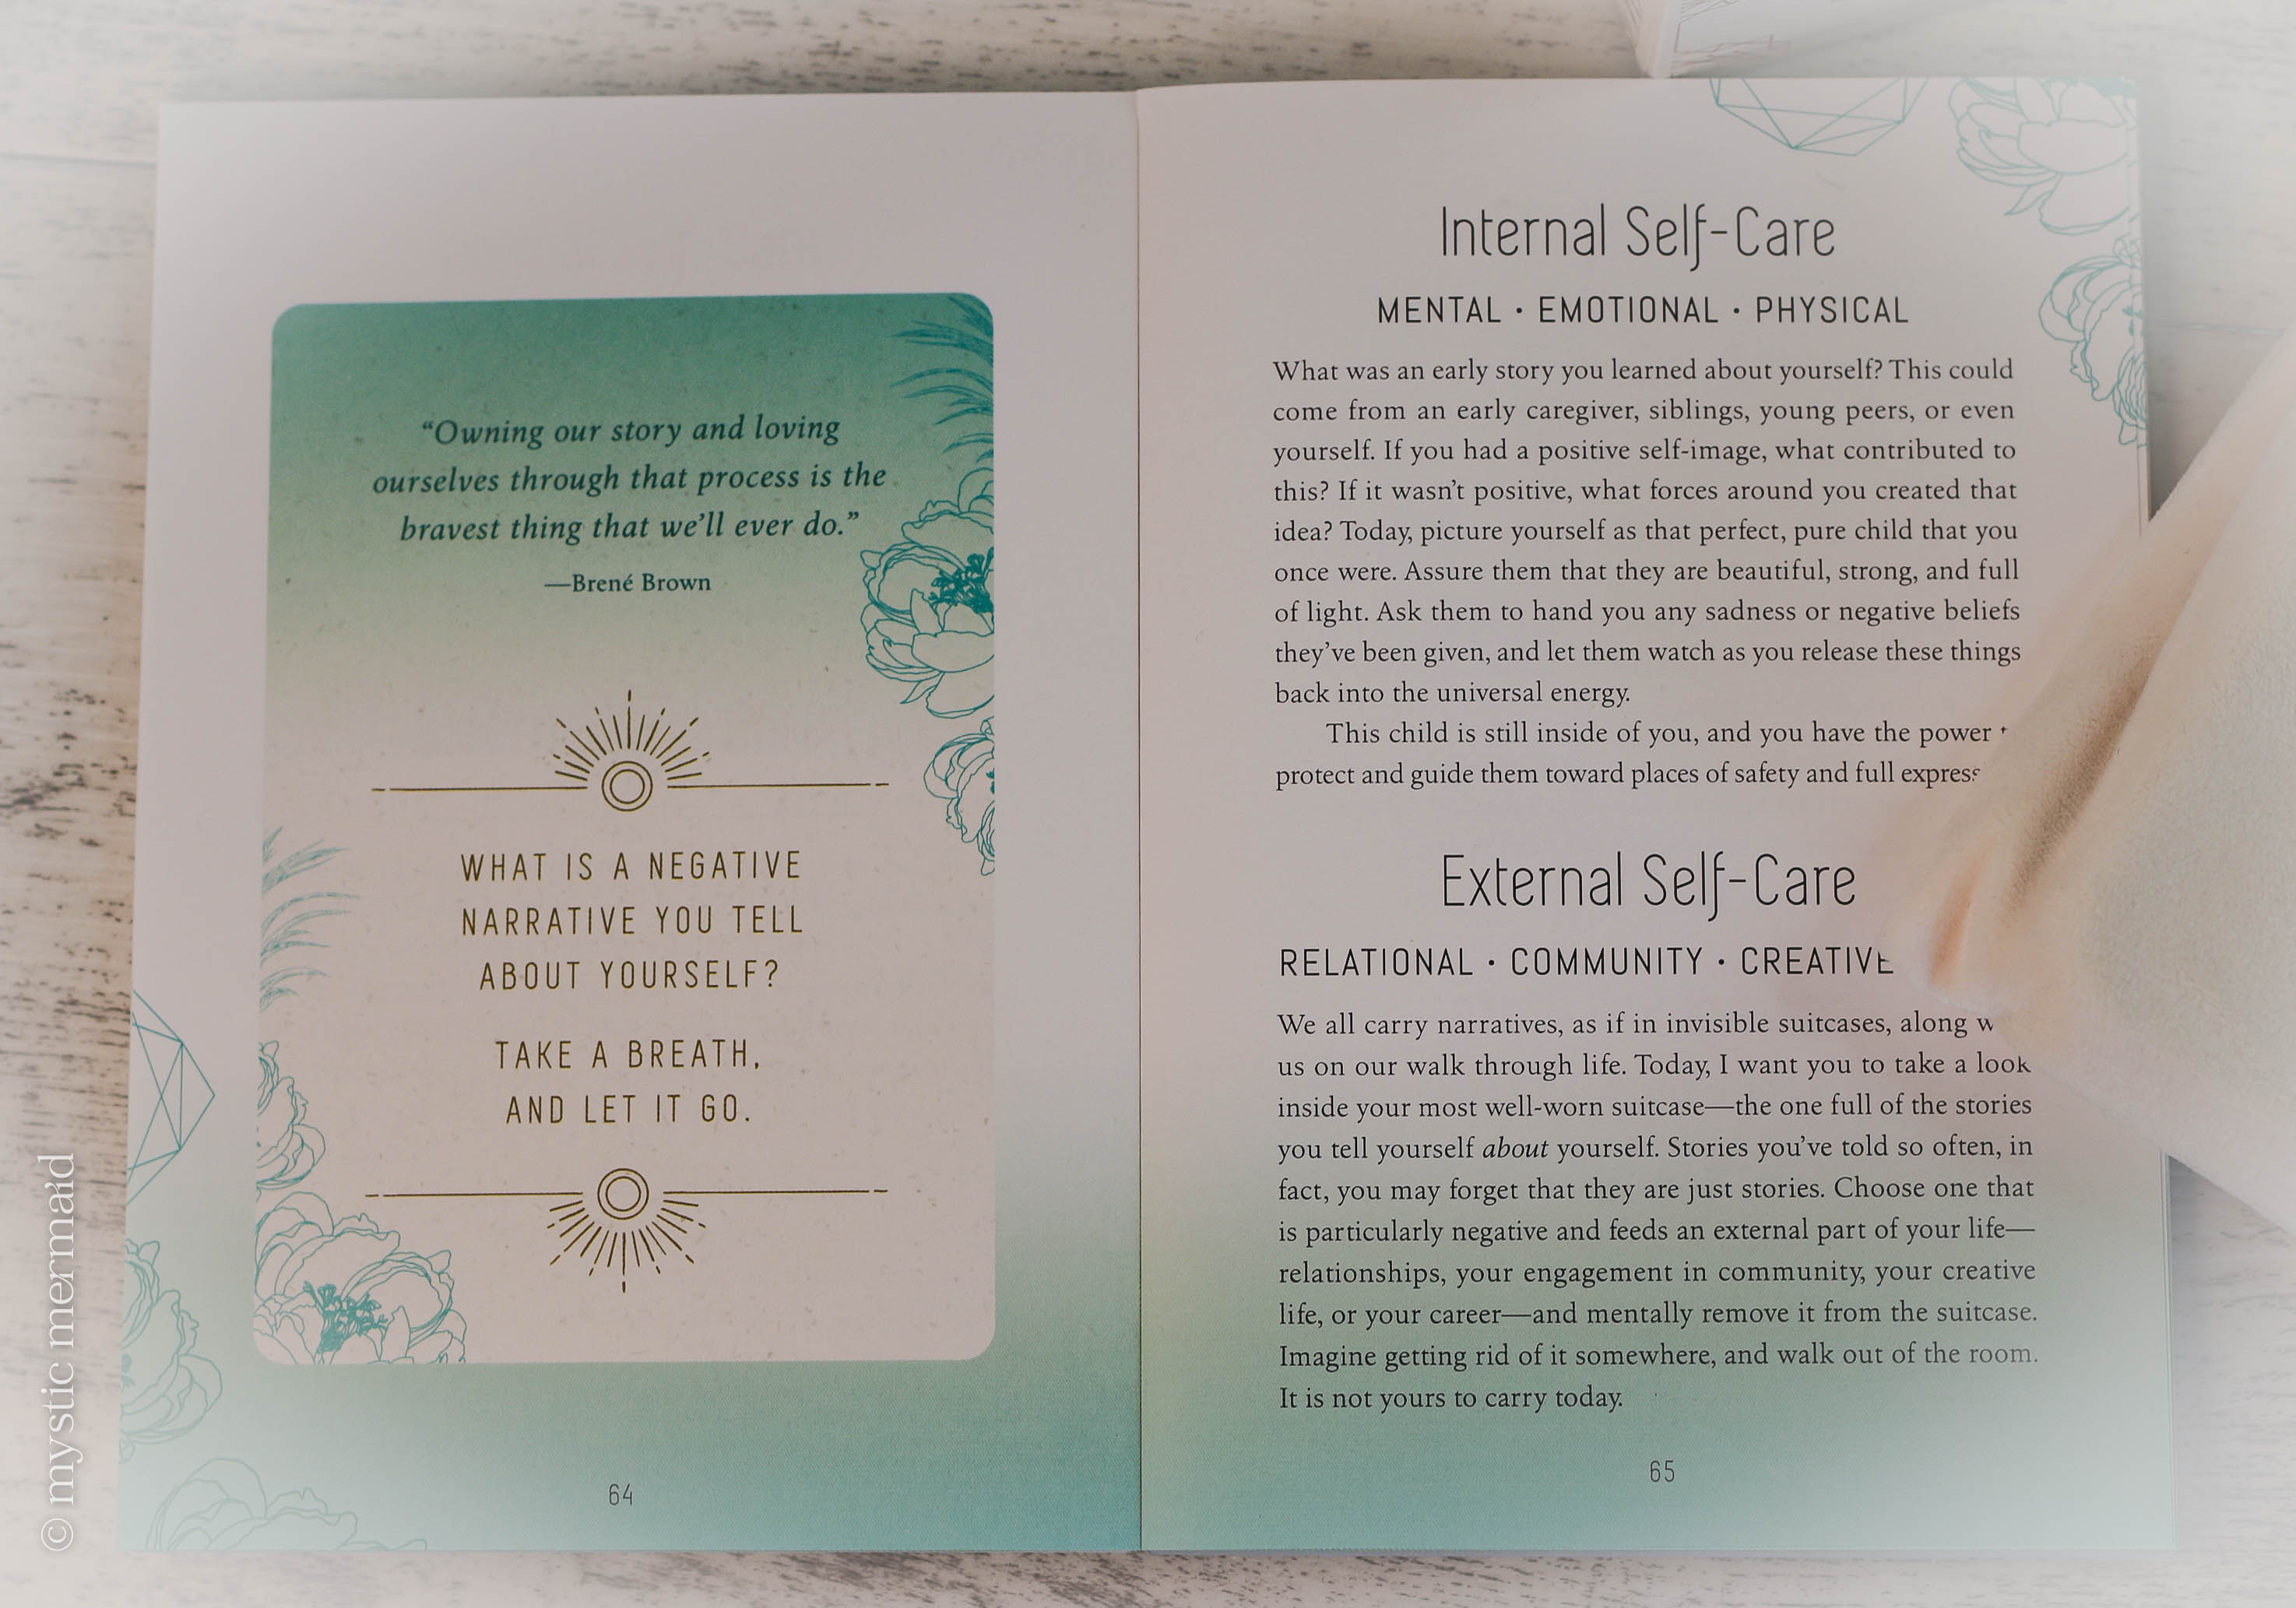 Self Care Inspirational Card Deck and Guide Book